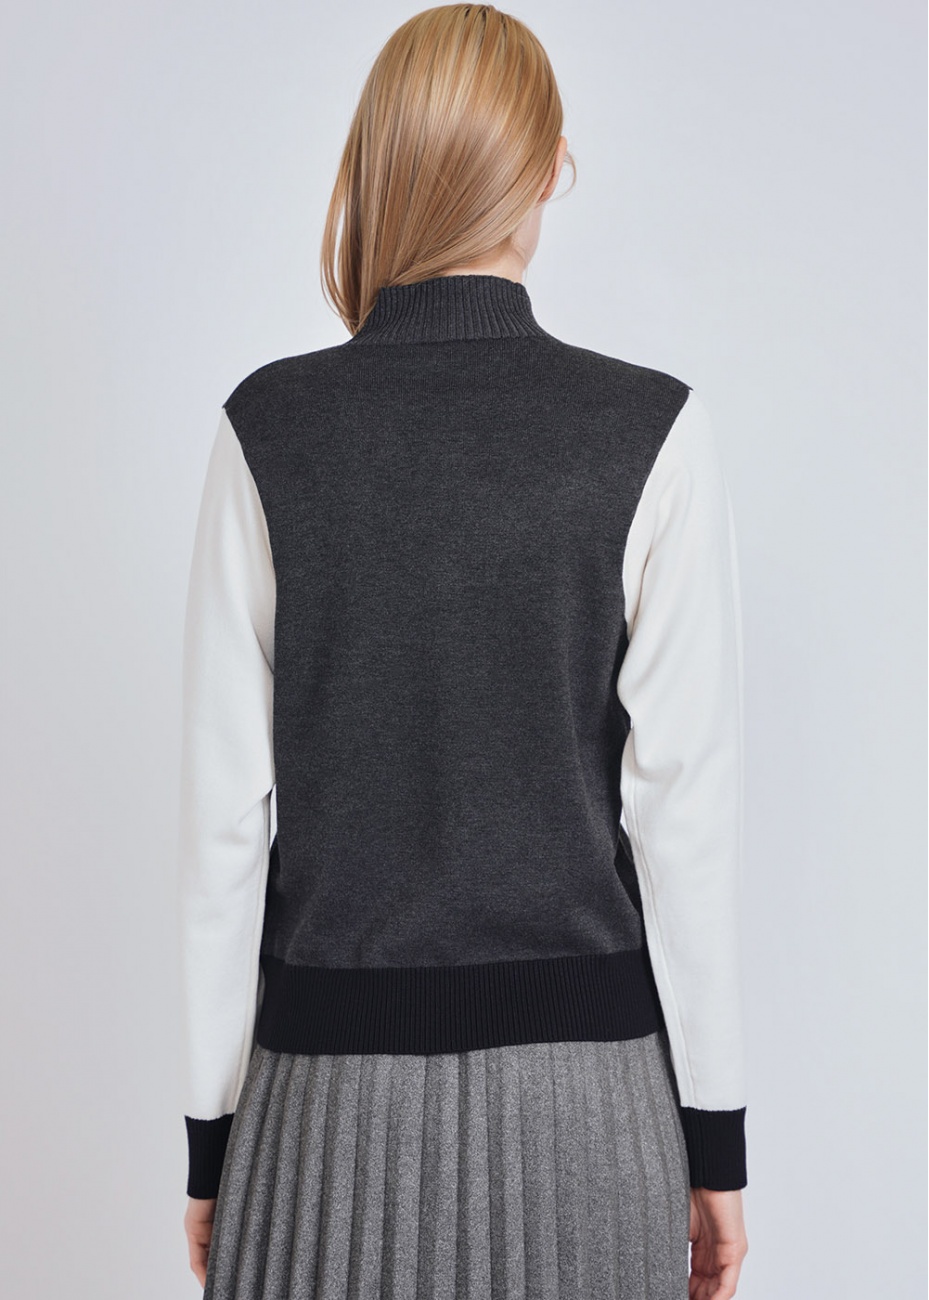 Dual-Shade High-Neck Sweater in Grey & White